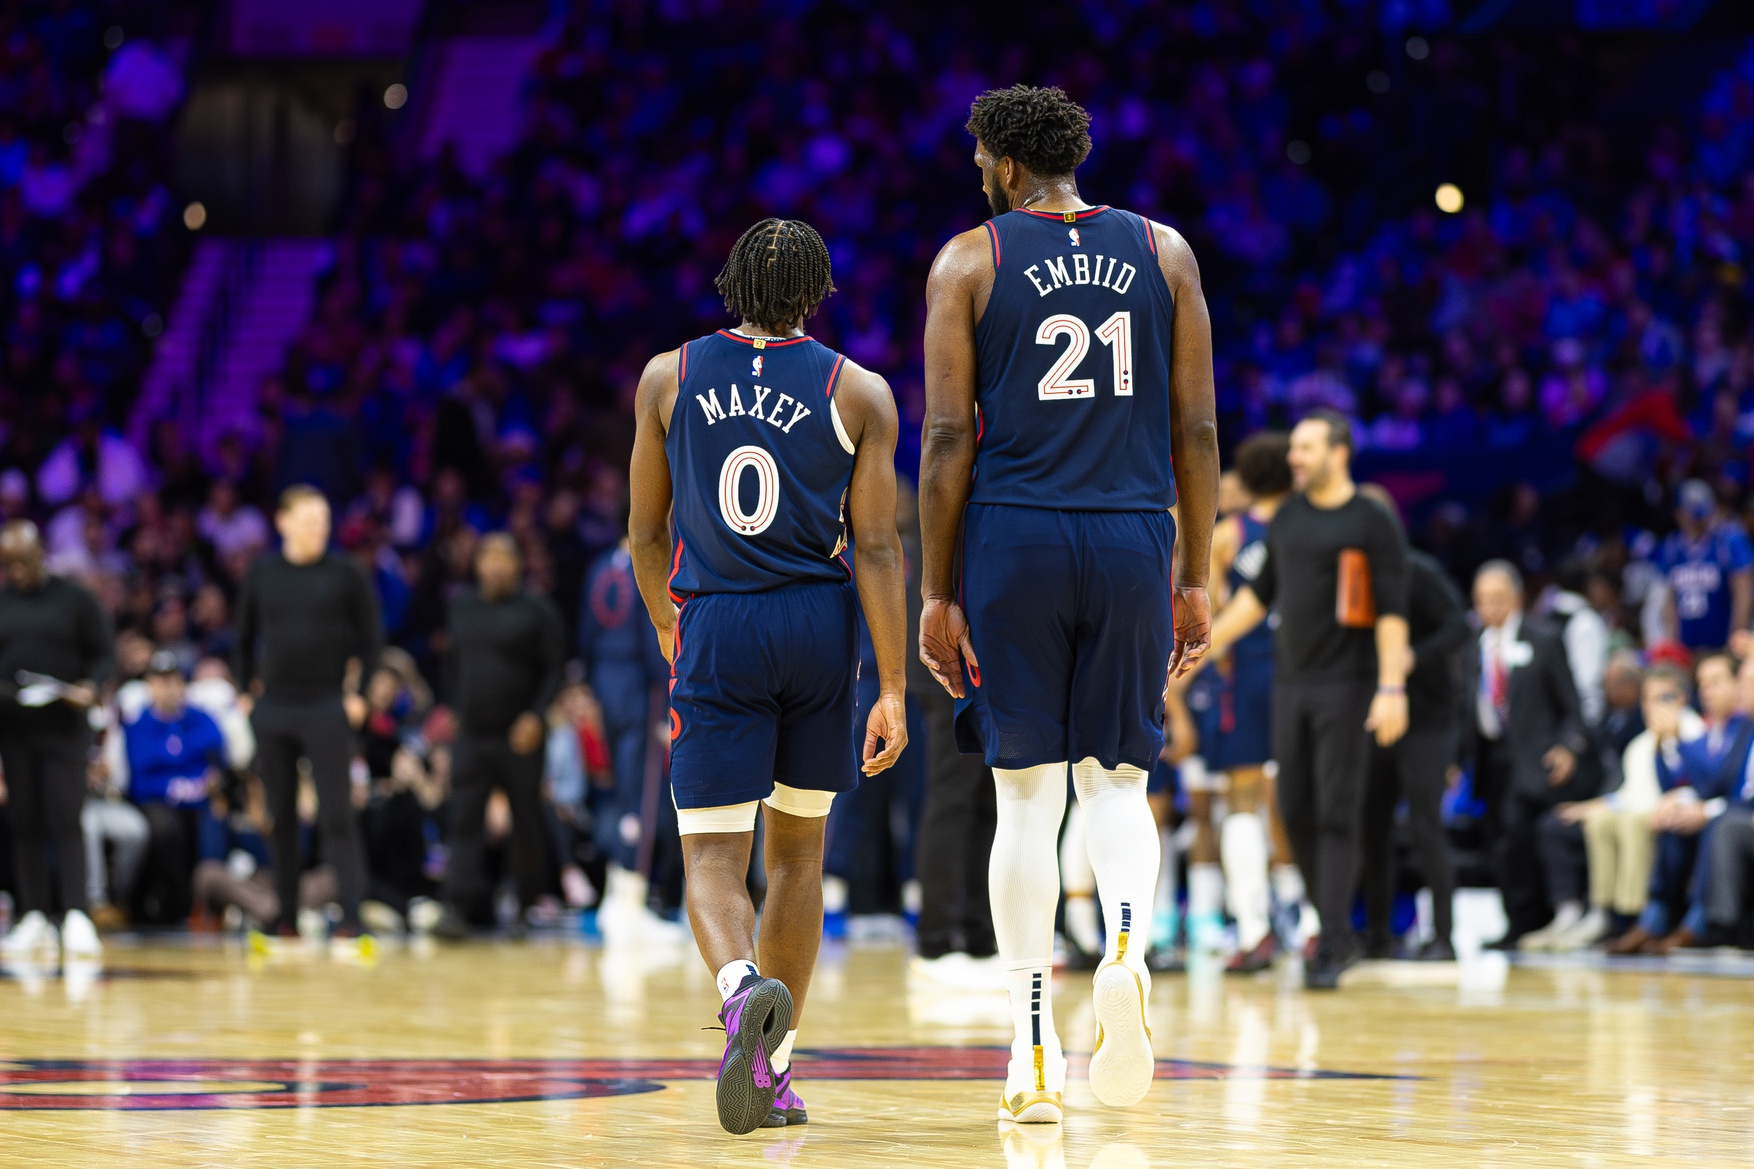 Philadelphia 76ers center Joel Embiid (21) and guard Tyrese Maxey (0) during a timeout in the second quarter against the Minnesota Timberwolves at Wells Fargo Center.